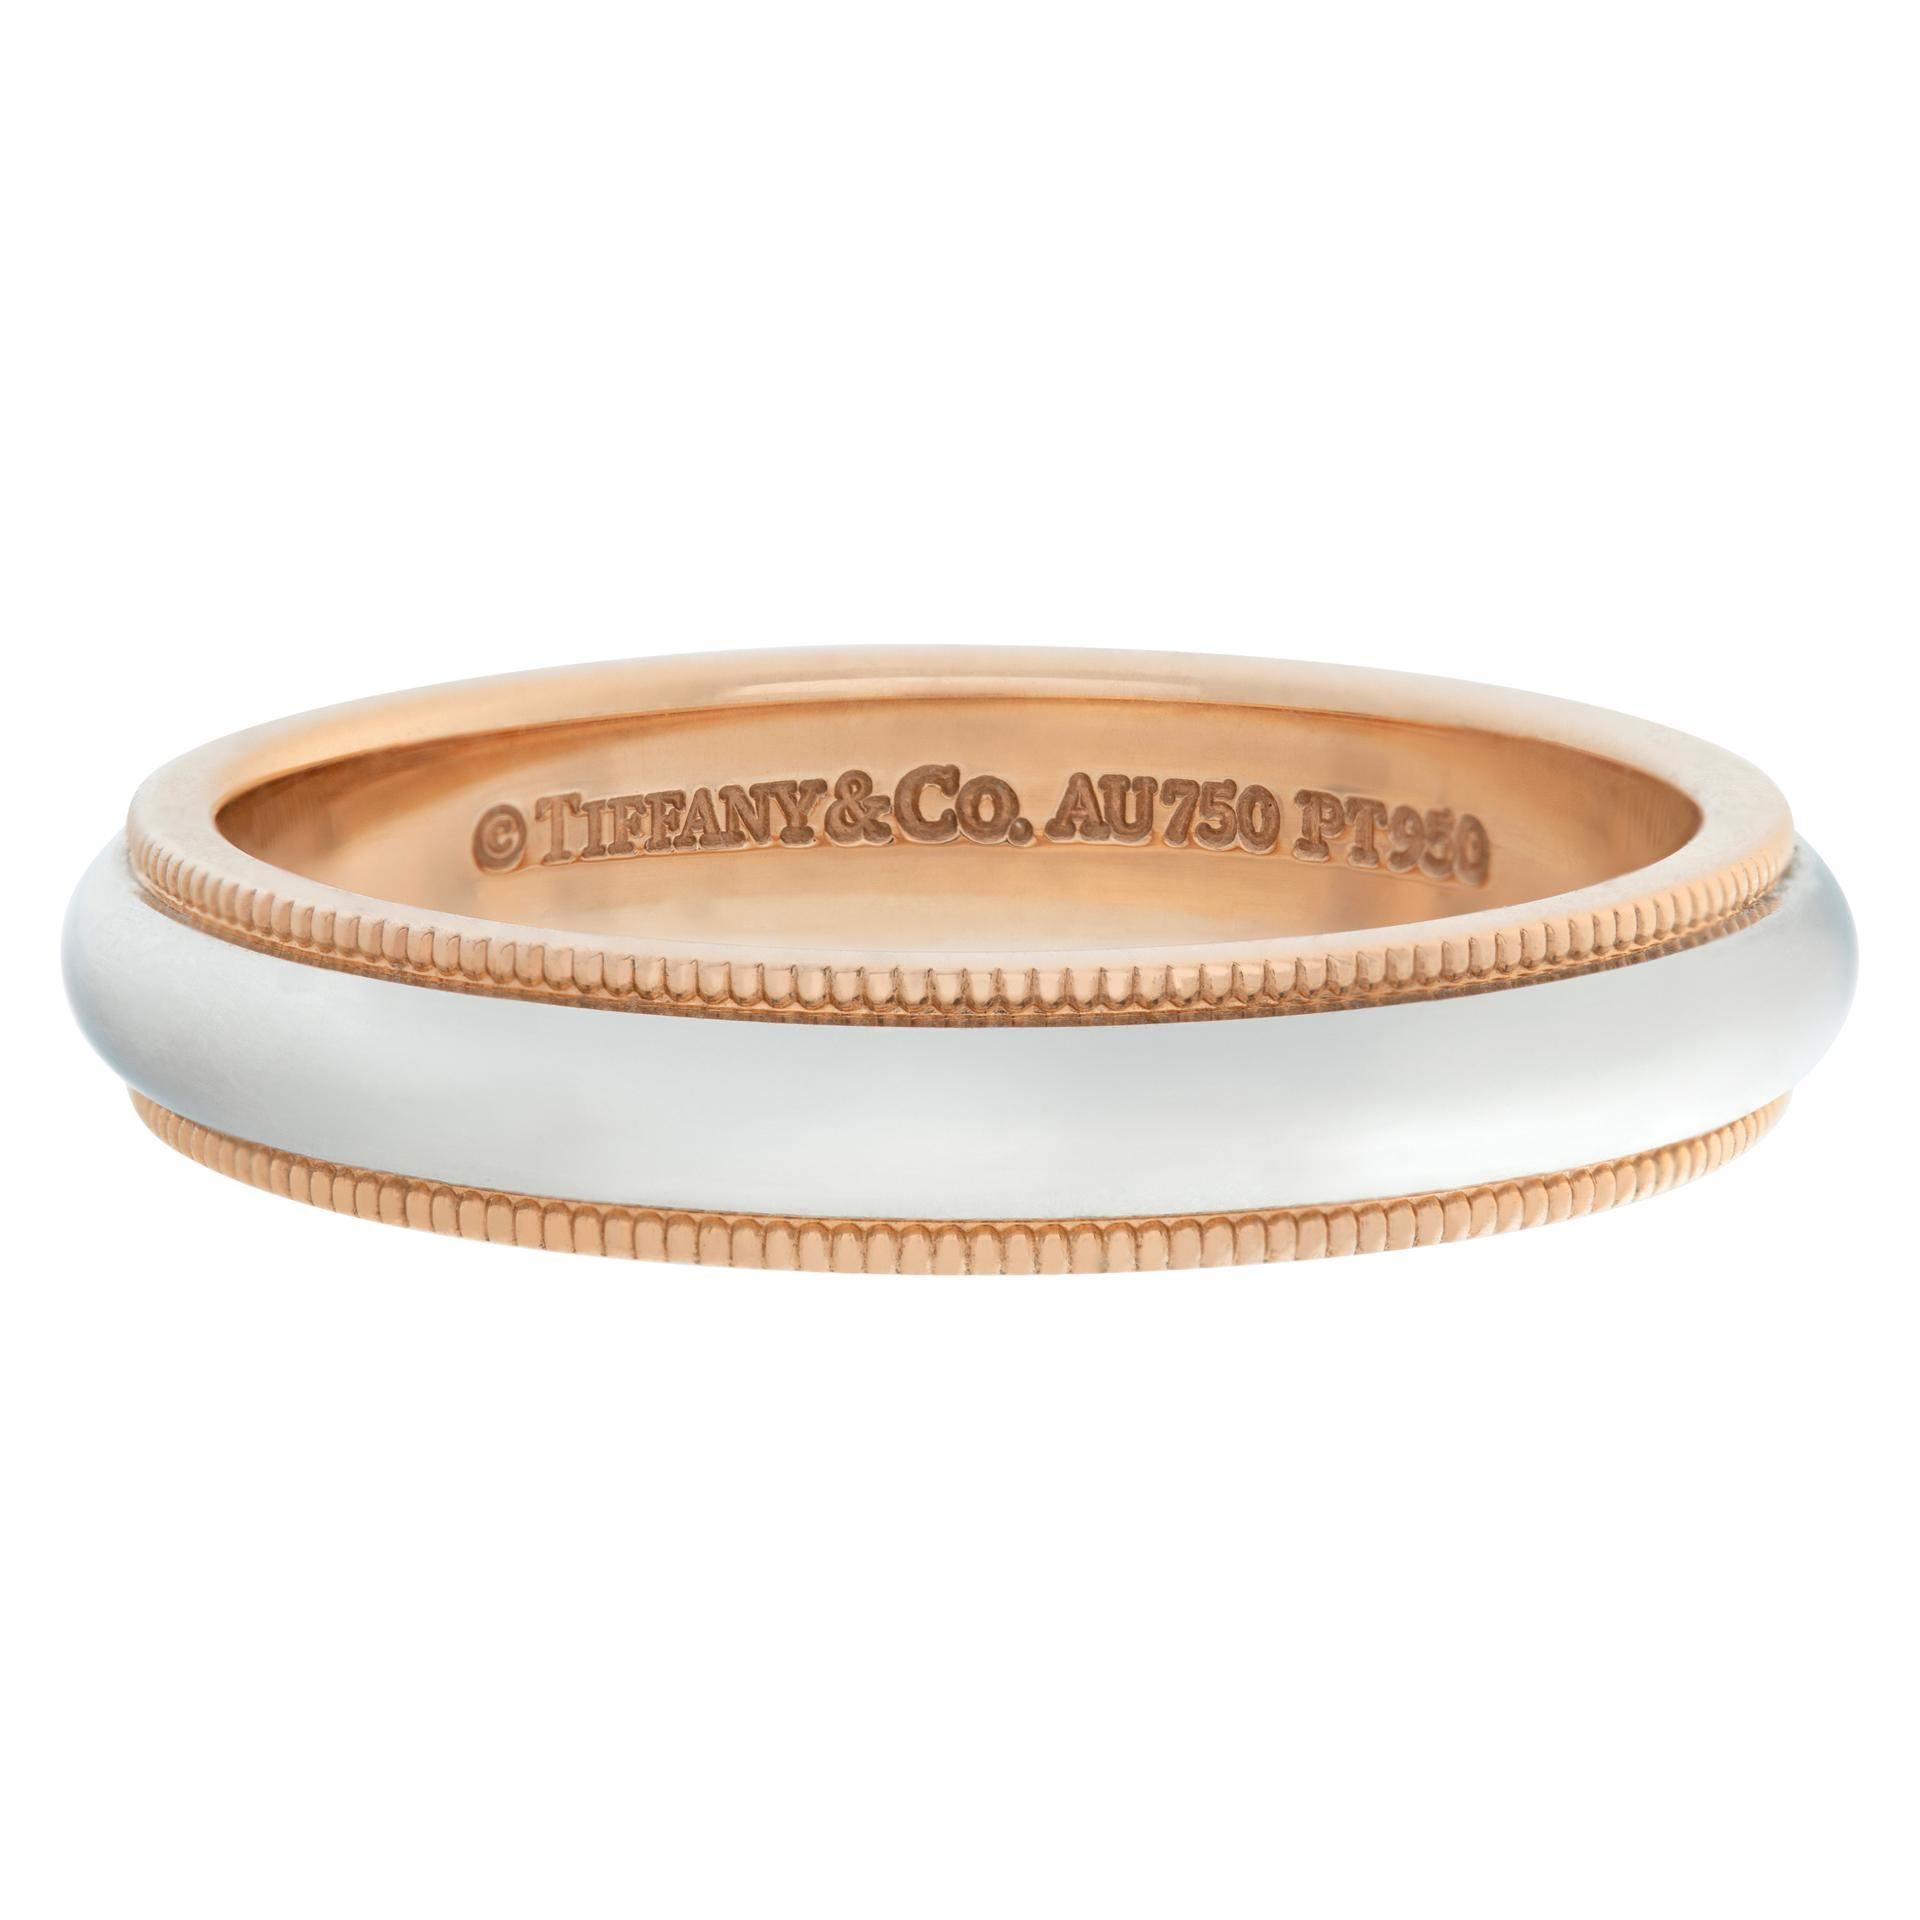 Tiffany & Co. wedding band 18k rose gold and platinum. Comes with Tiffany & Co. receipt. Size 8.5, Circa 2021. 3.8 mm widthThis Tiffany & Co. ring is currently size 8.5 and some items can be sized up or down, please ask! It weighs 4.5 pennyweights